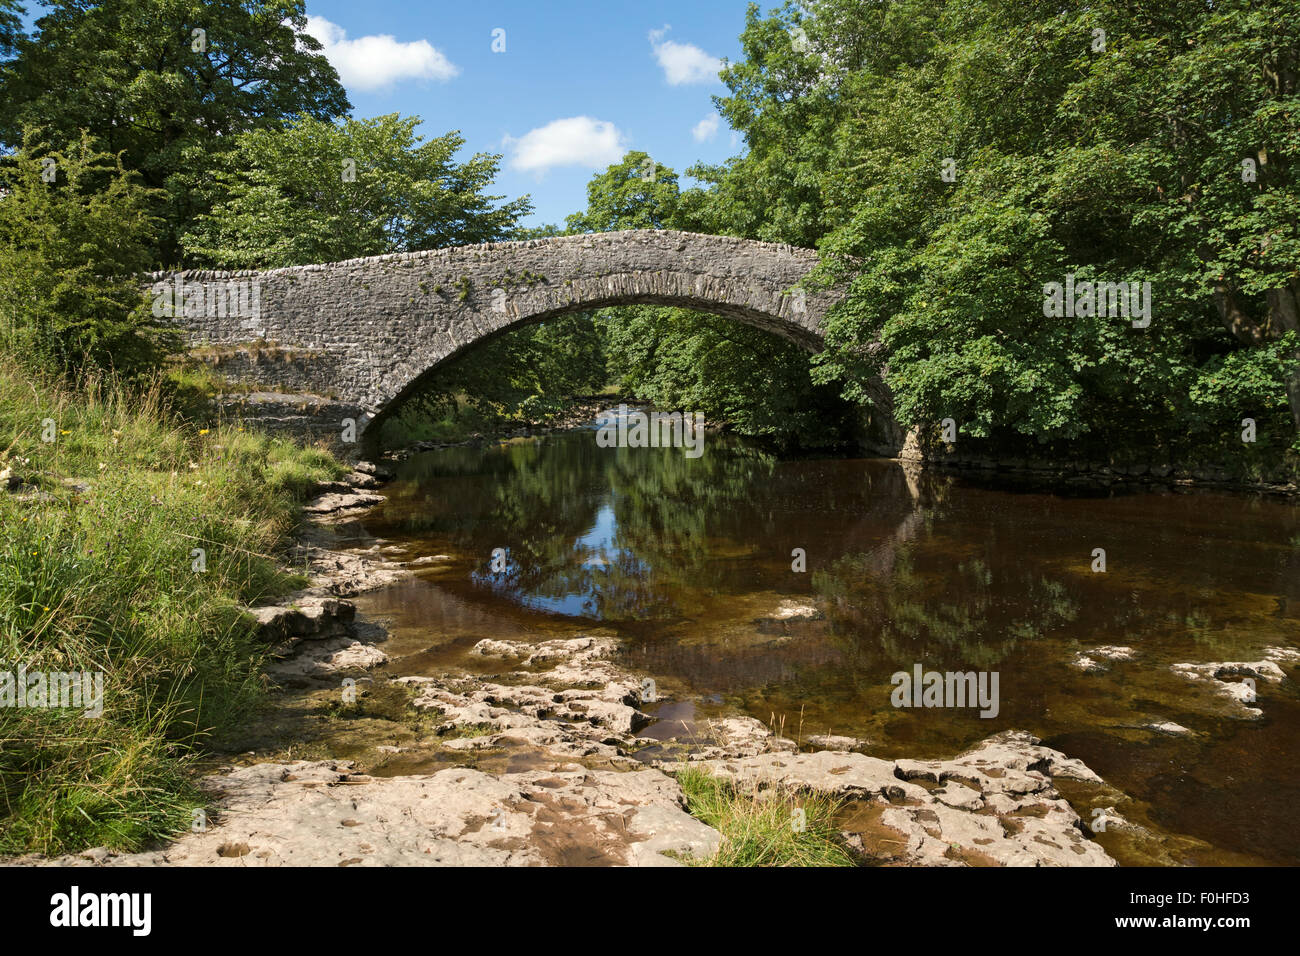 The Packhorse Bridge at Stainforth, Ribblesdale, Yorkshire Dales National Park. Stock Photo